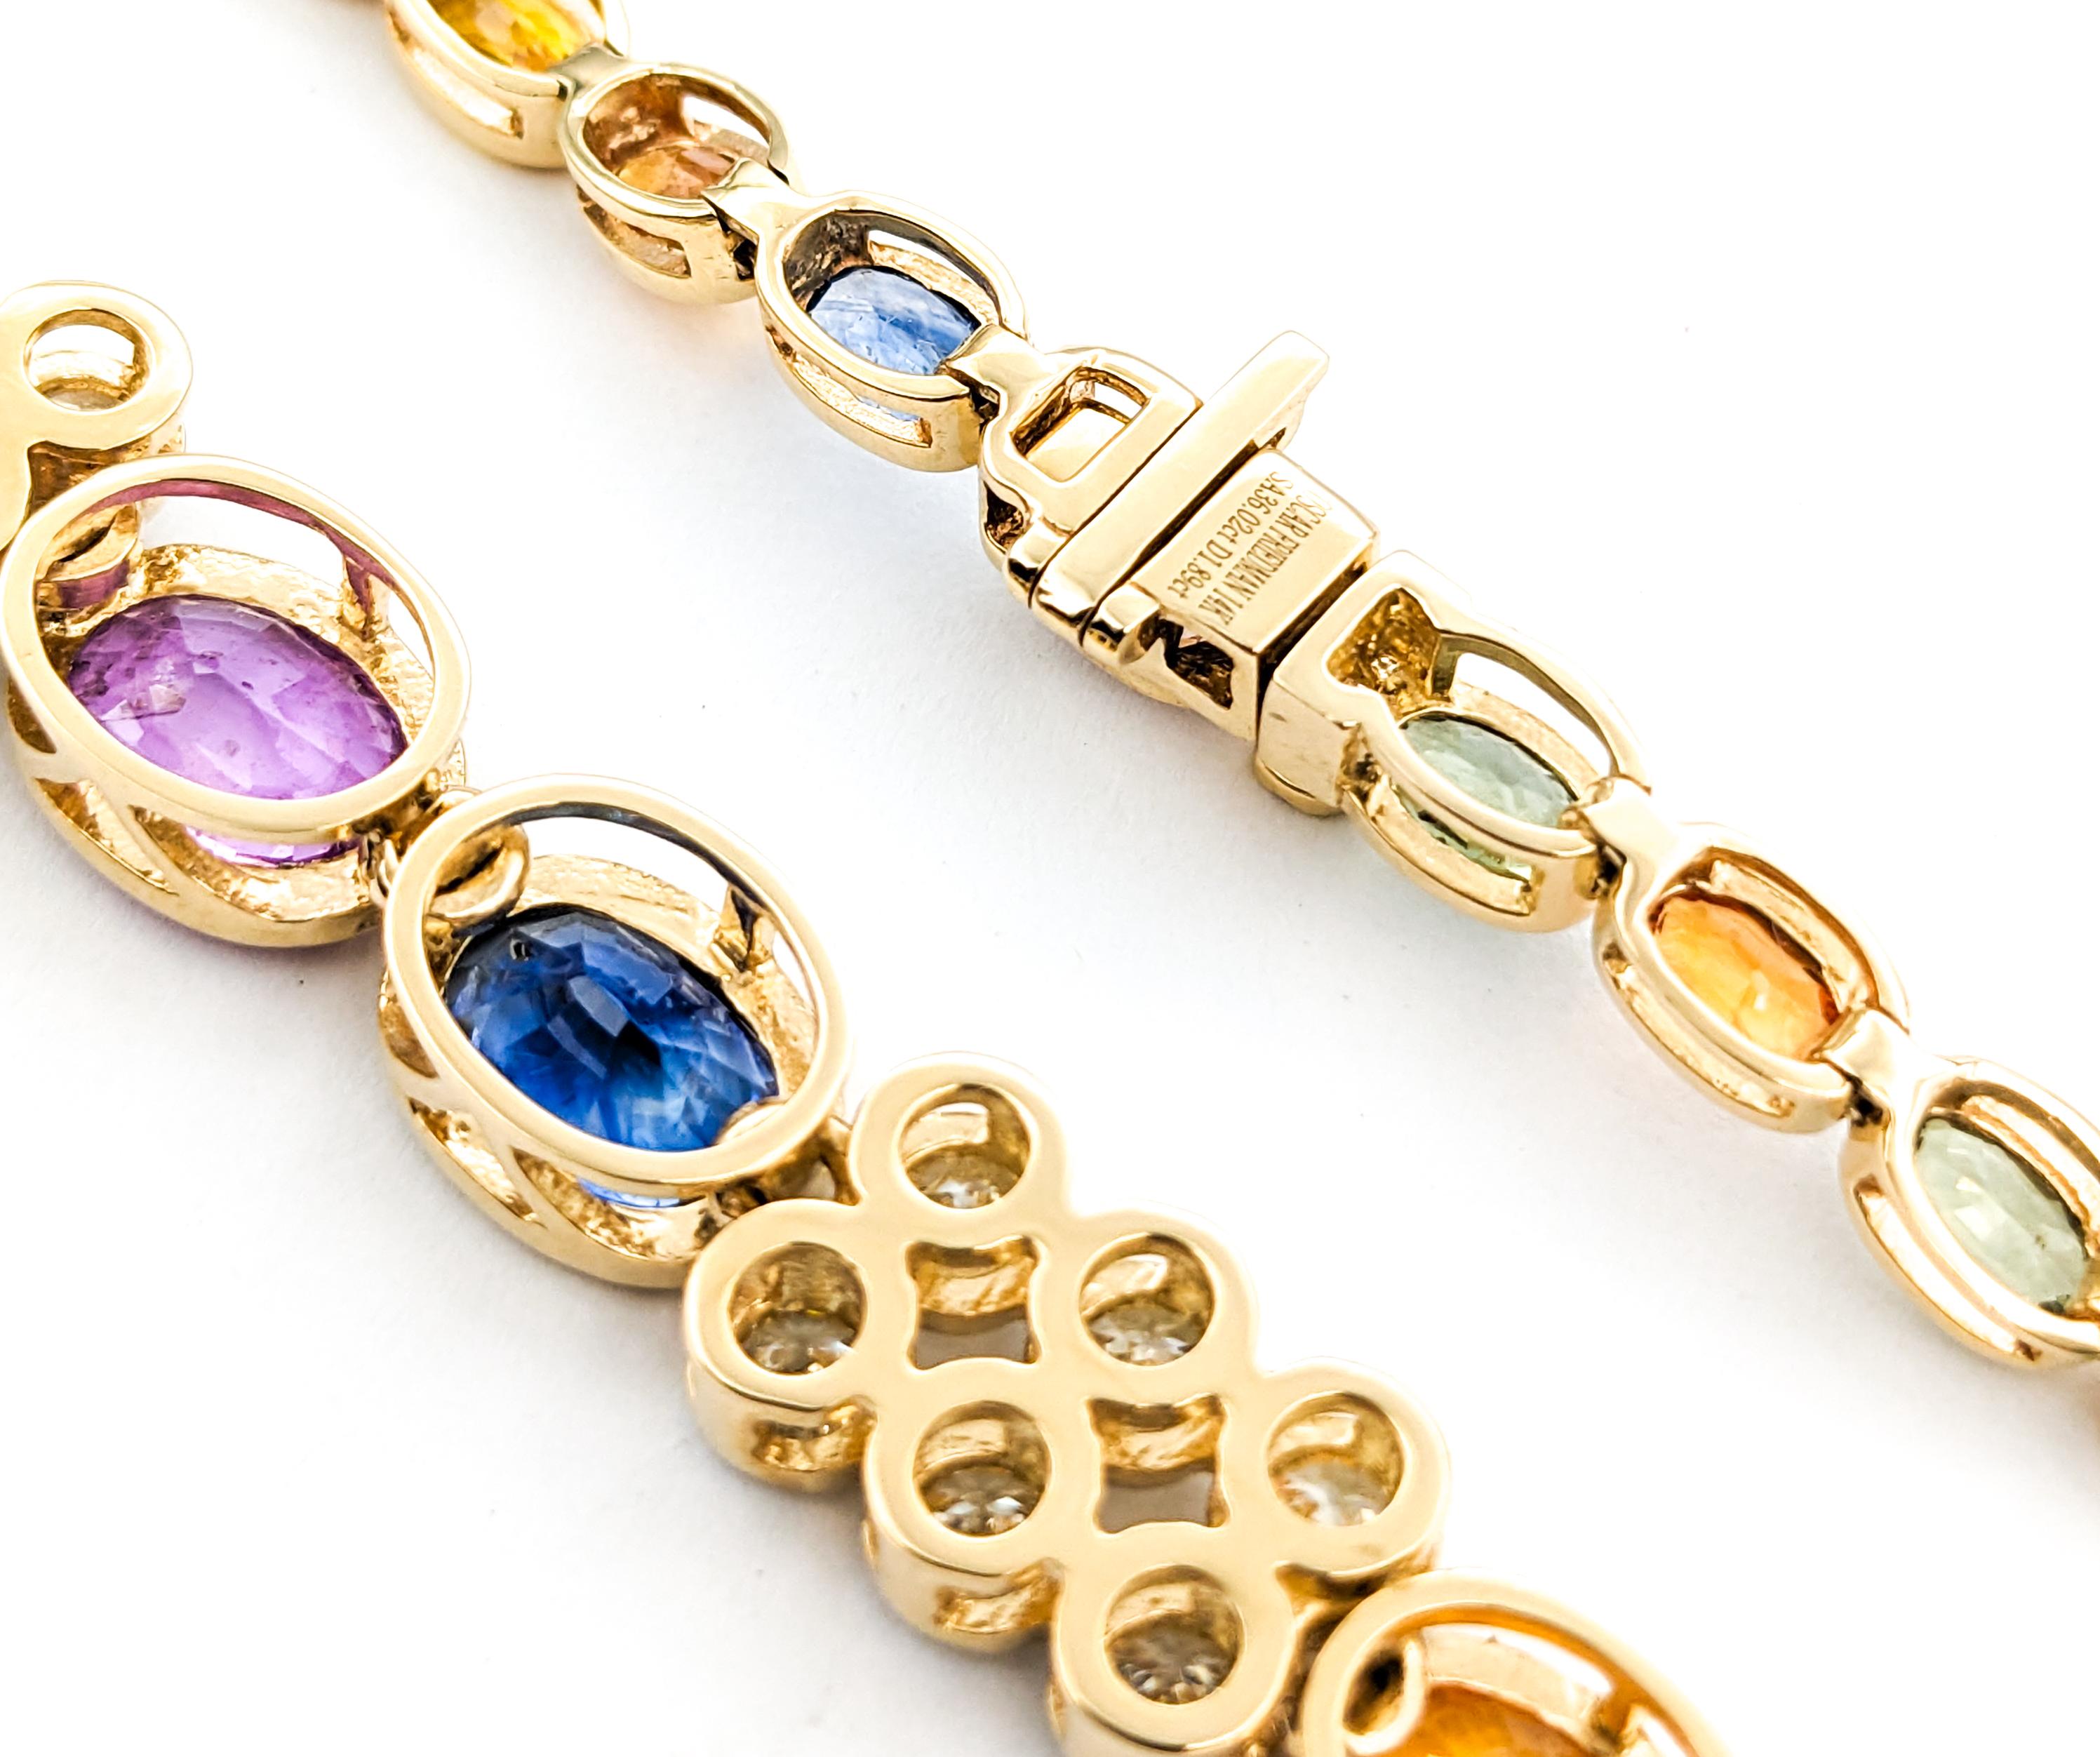 36.02ctw of Multi-Colored Sapphires & 1.89ctw Diamond Necklace In Yellow Gold For Sale 2